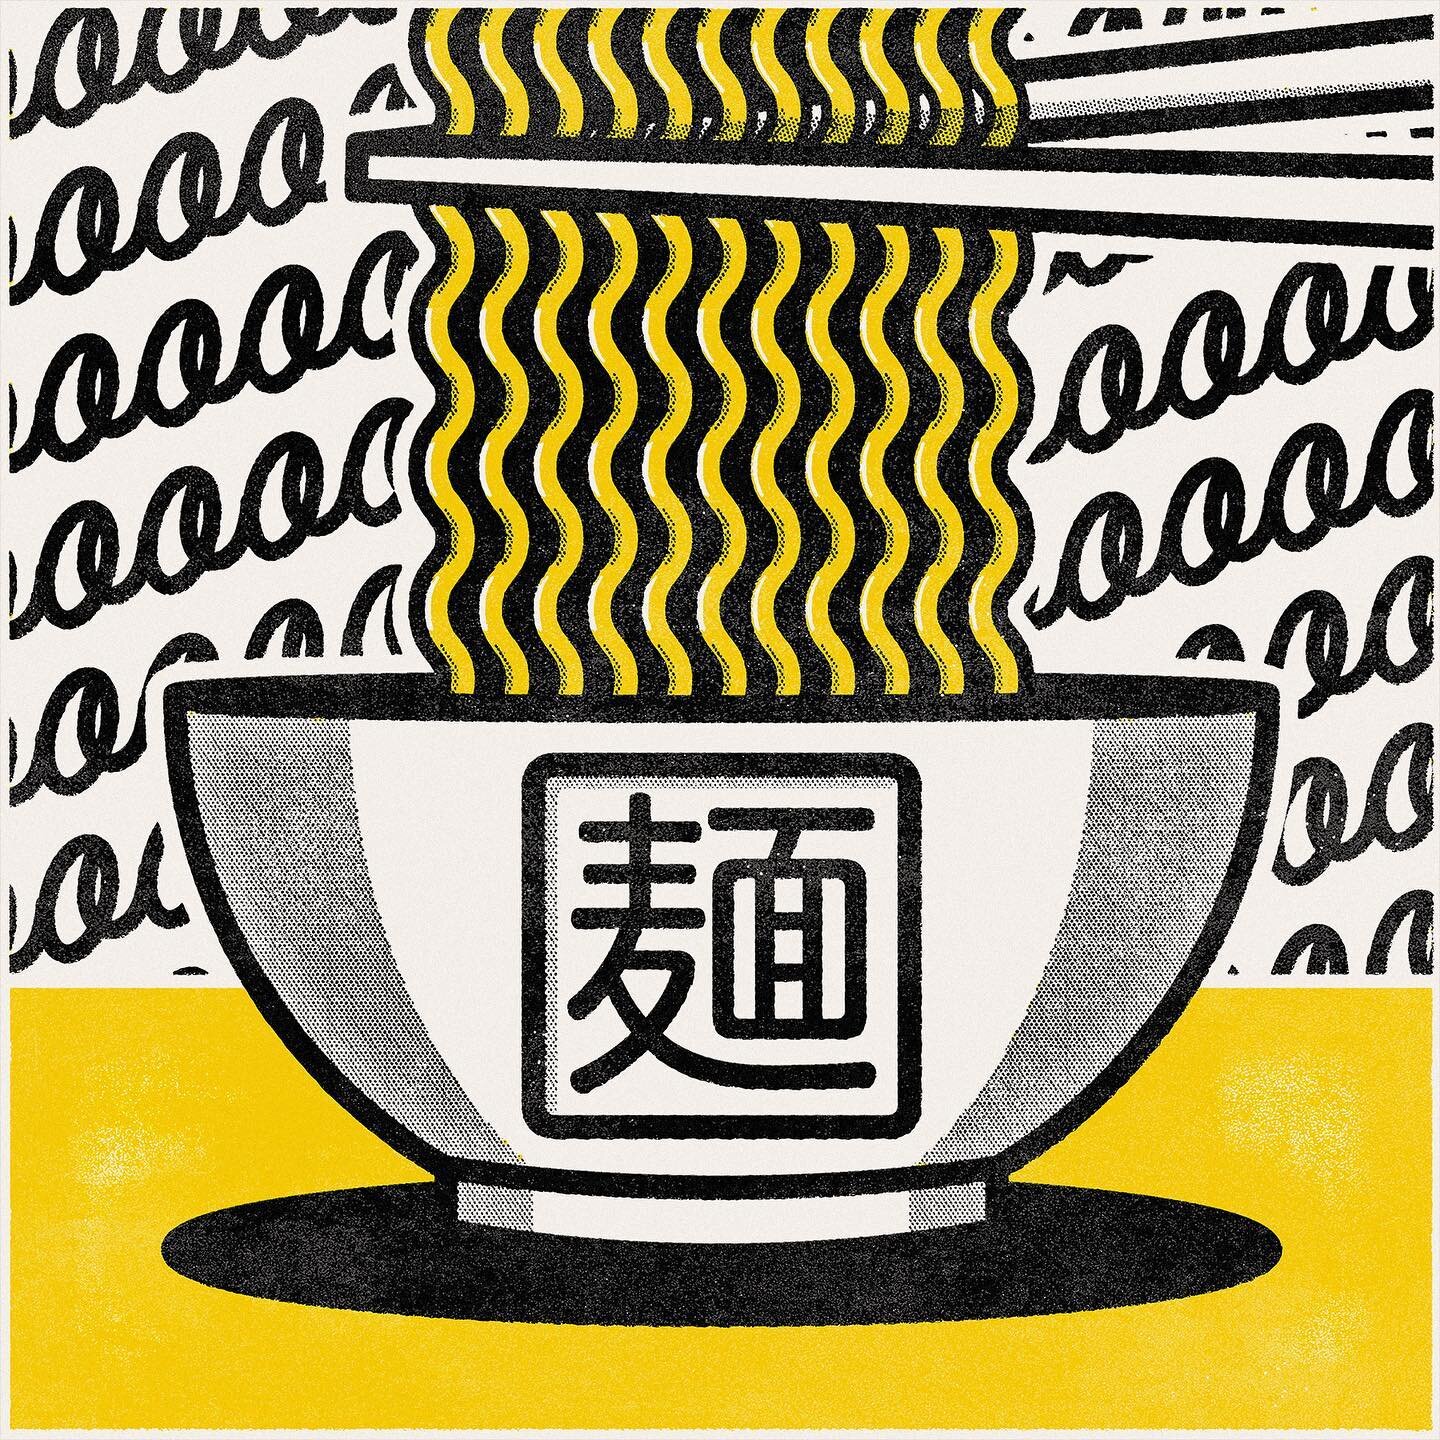 Oodles of noodles 🇯🇵 🍜 never not thinking about food 🥹

#noodles #麺 #illustration #foodillustration #yellow #texture #typography #design #designinspo #designinspiration #designspiration #screenprinting #illustrations #illustration_daily #dailydra